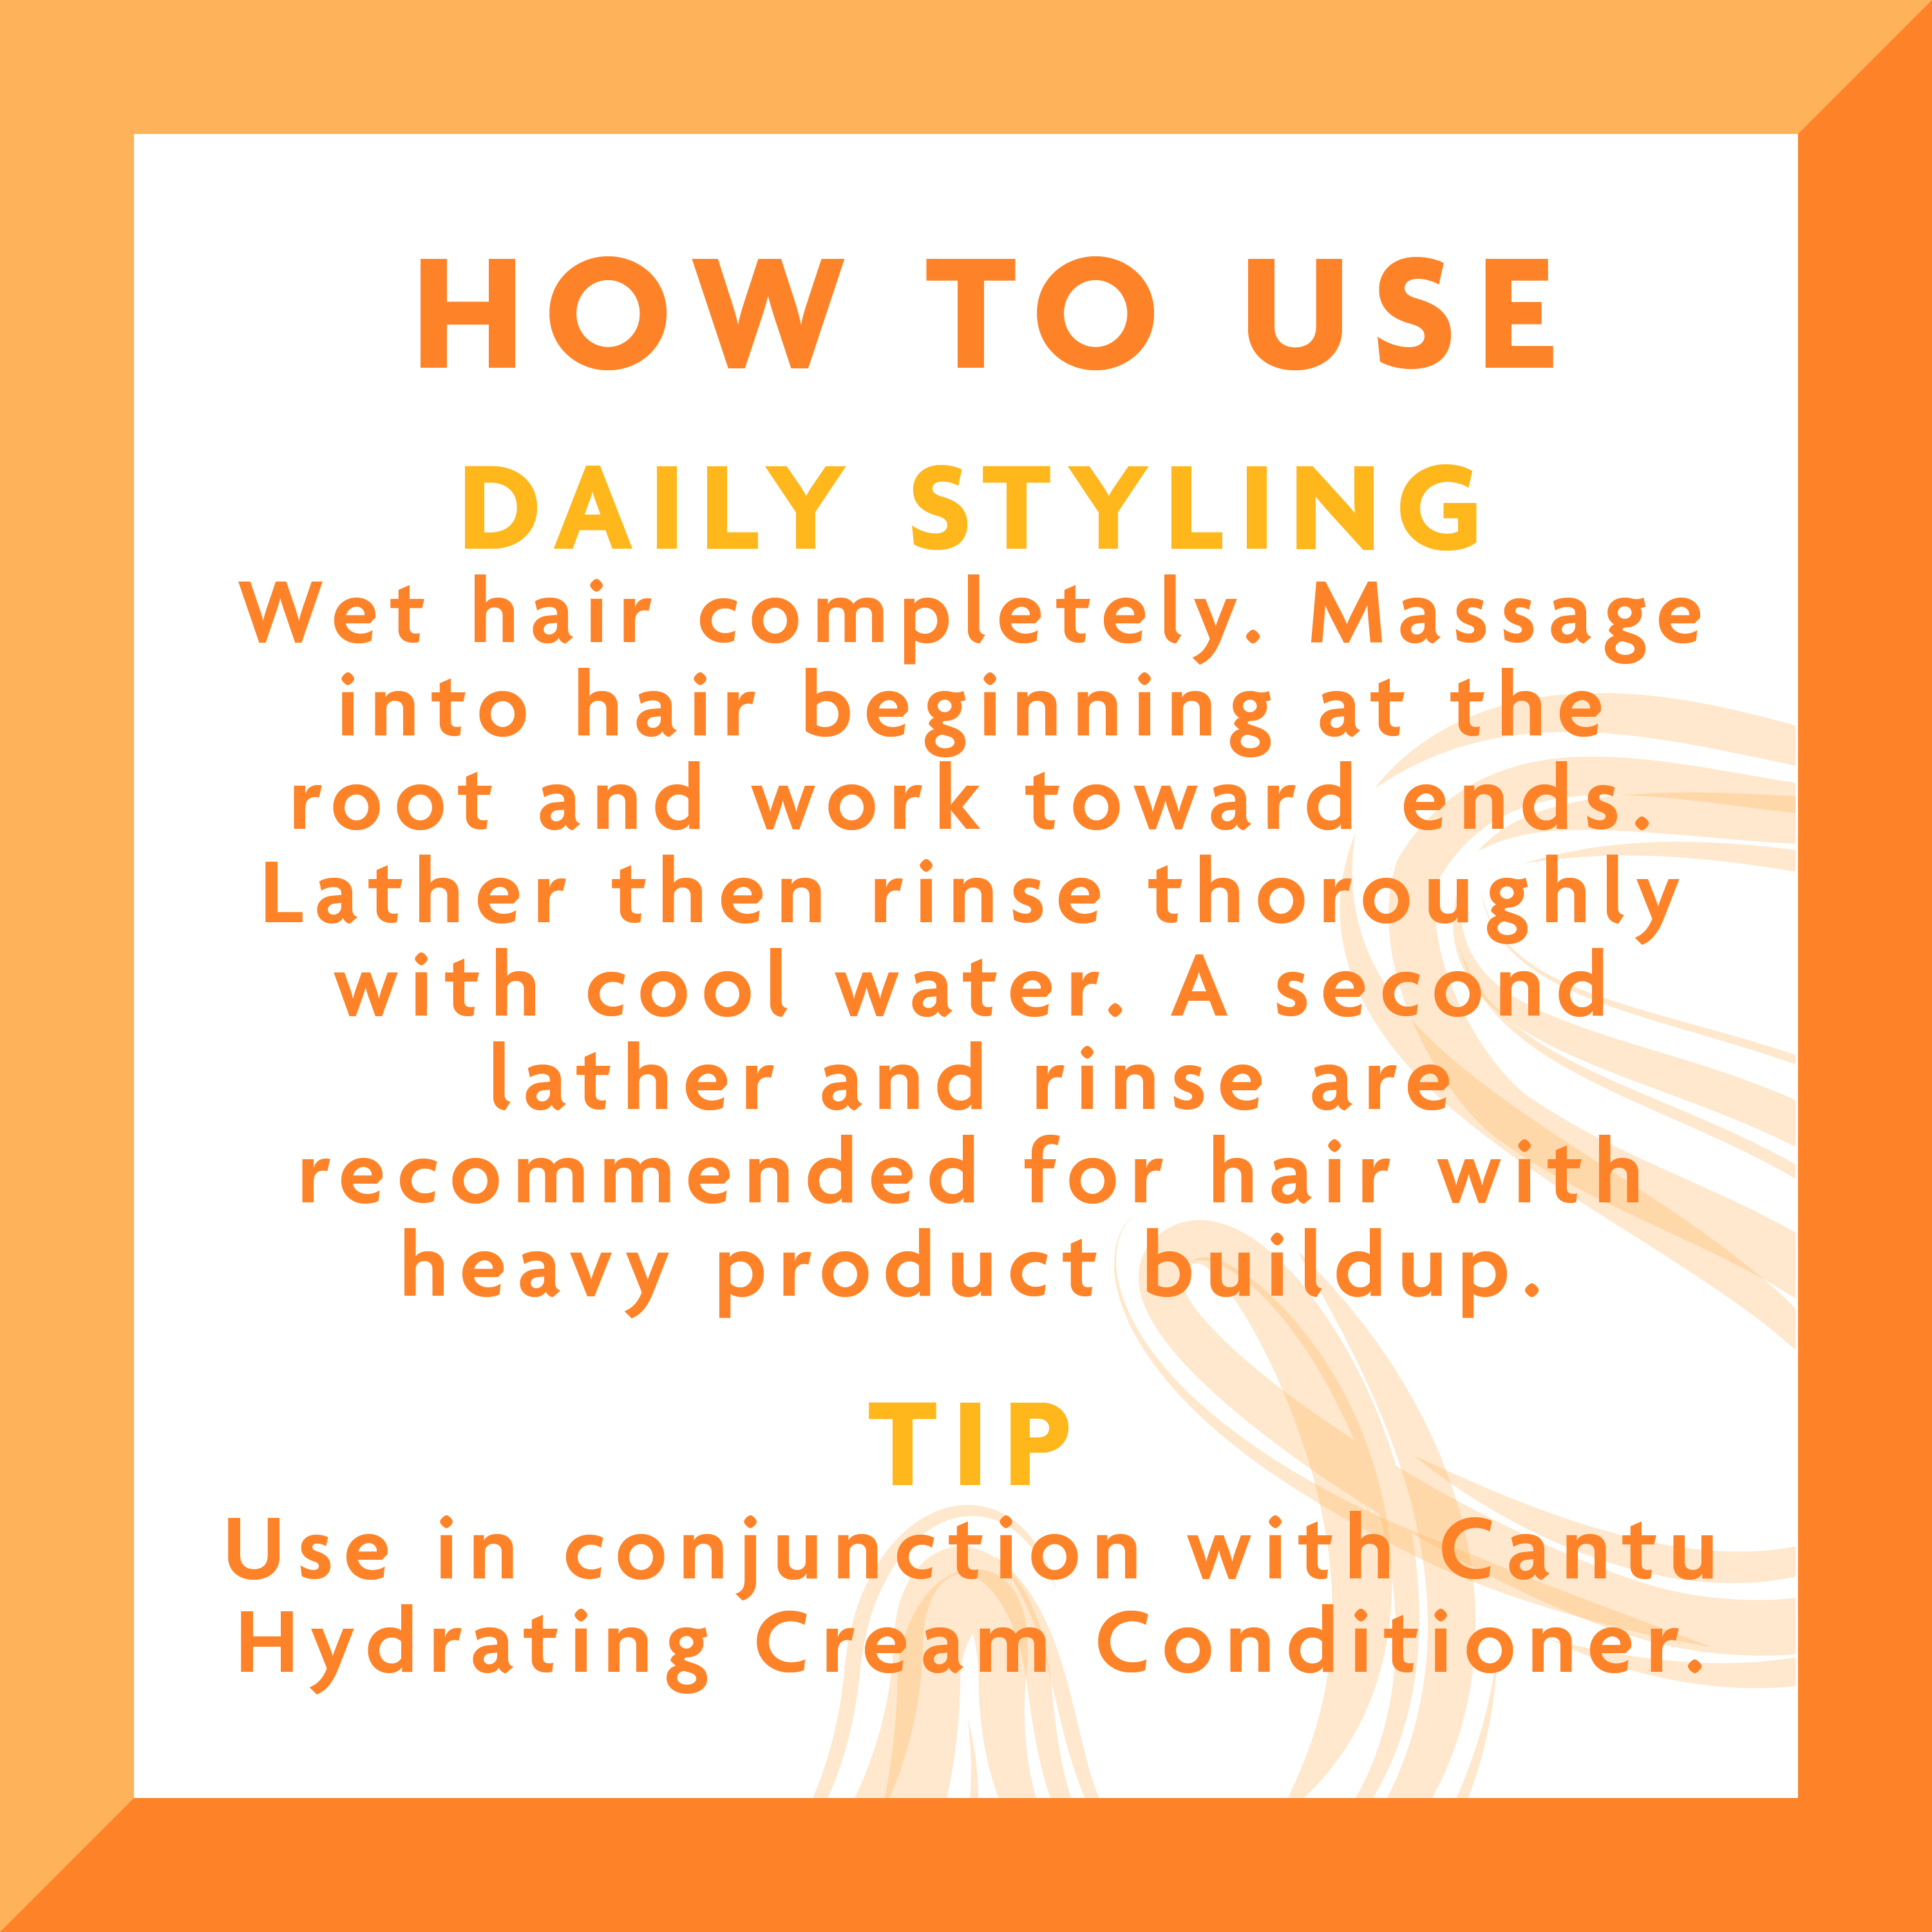 Cantu Sulfate-Free Cleansing Cream Shampoo for Natural Hair, Sulfate-Free with Shea Butter, 25 fl oz. - image 8 of 12